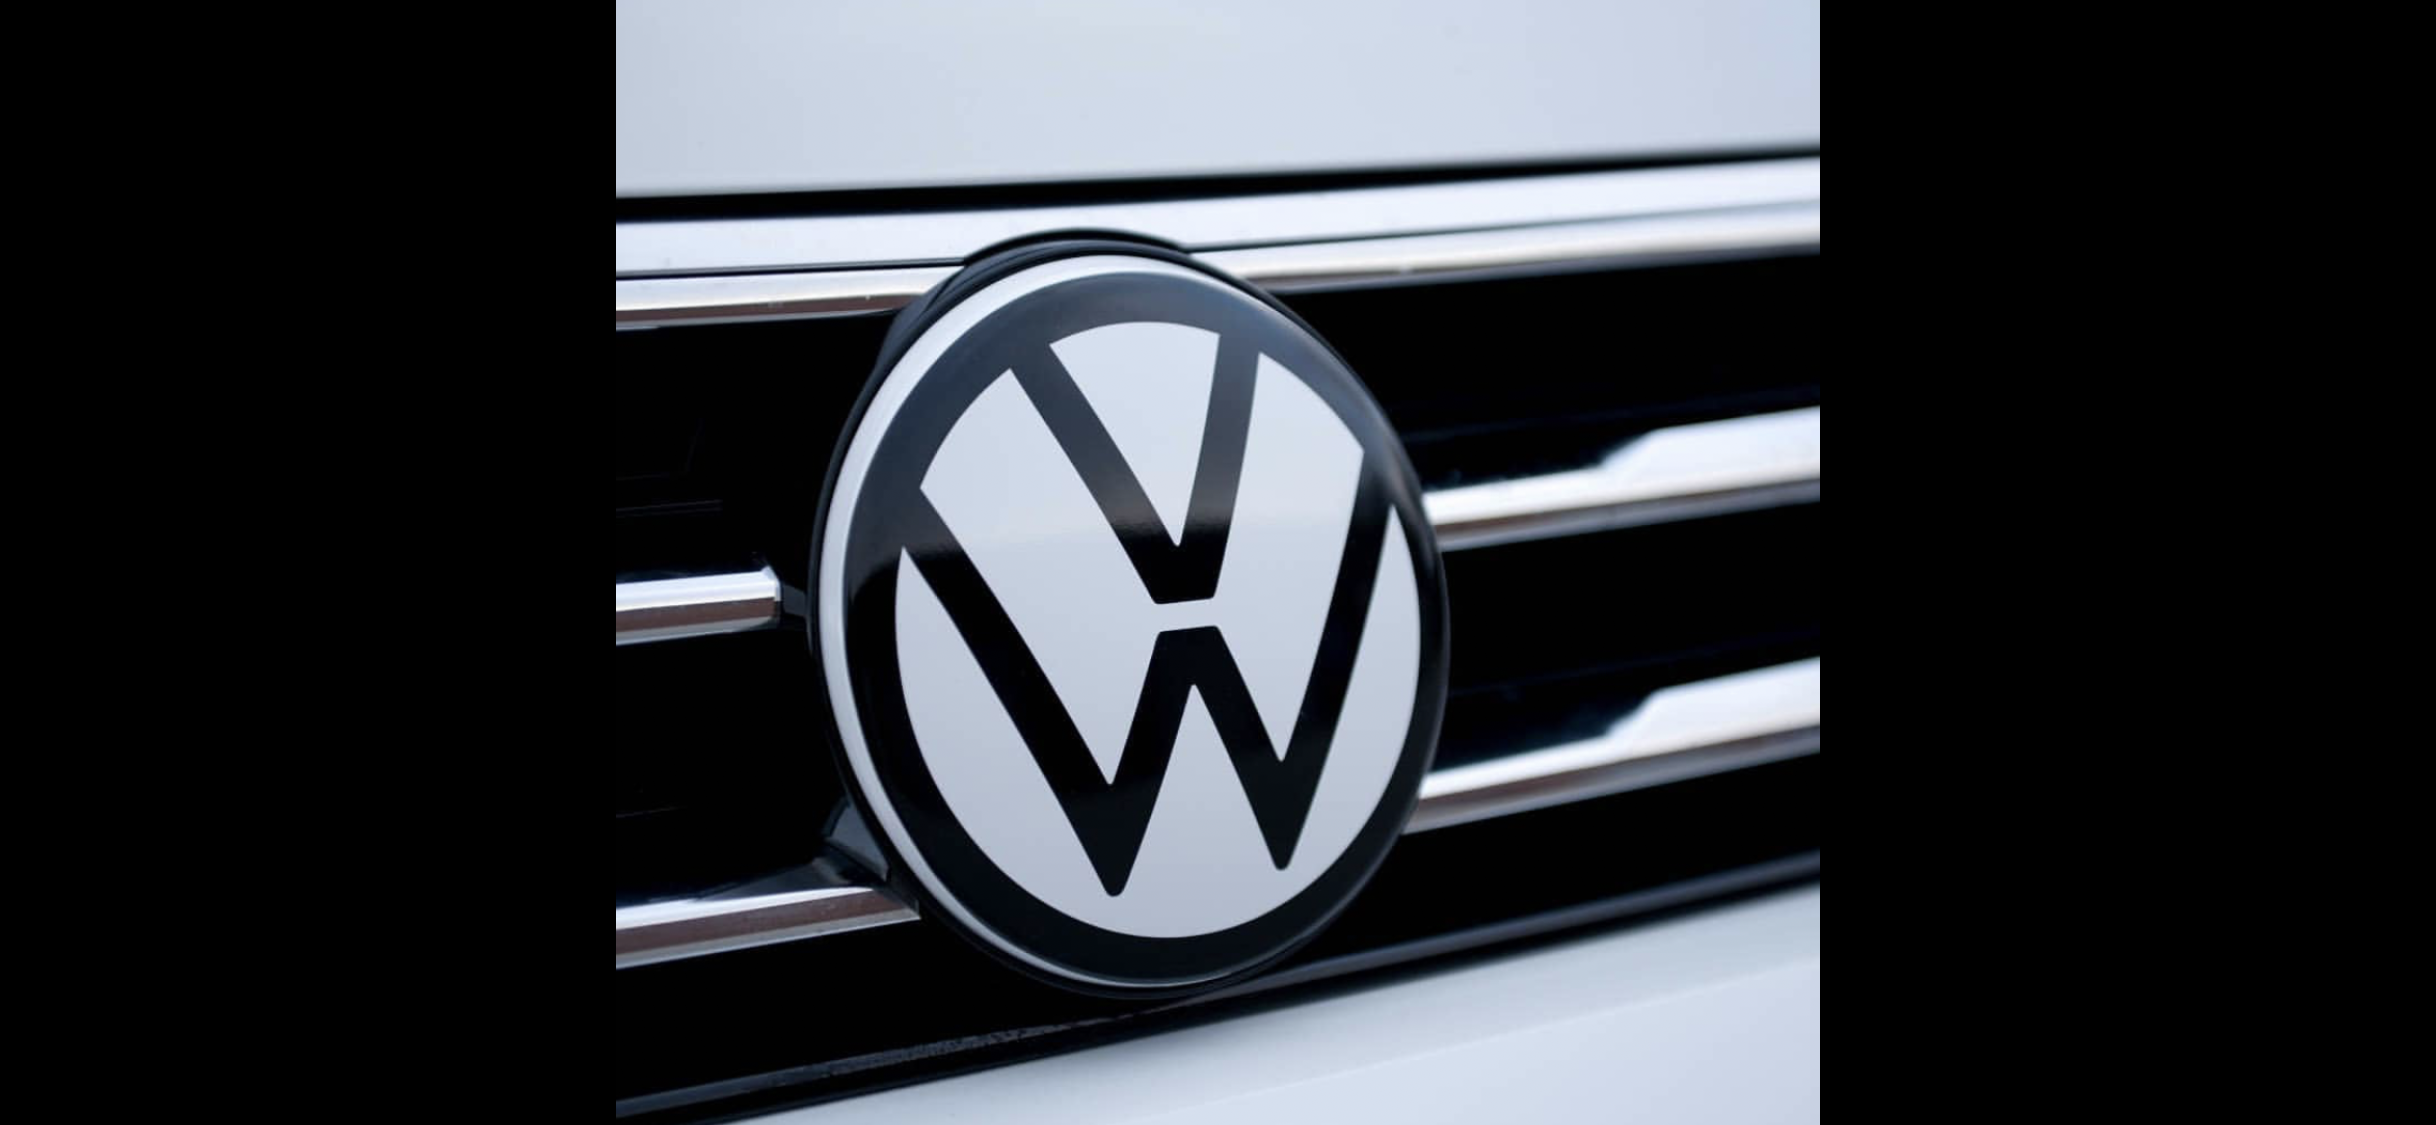 White Silhouette New style vw badge